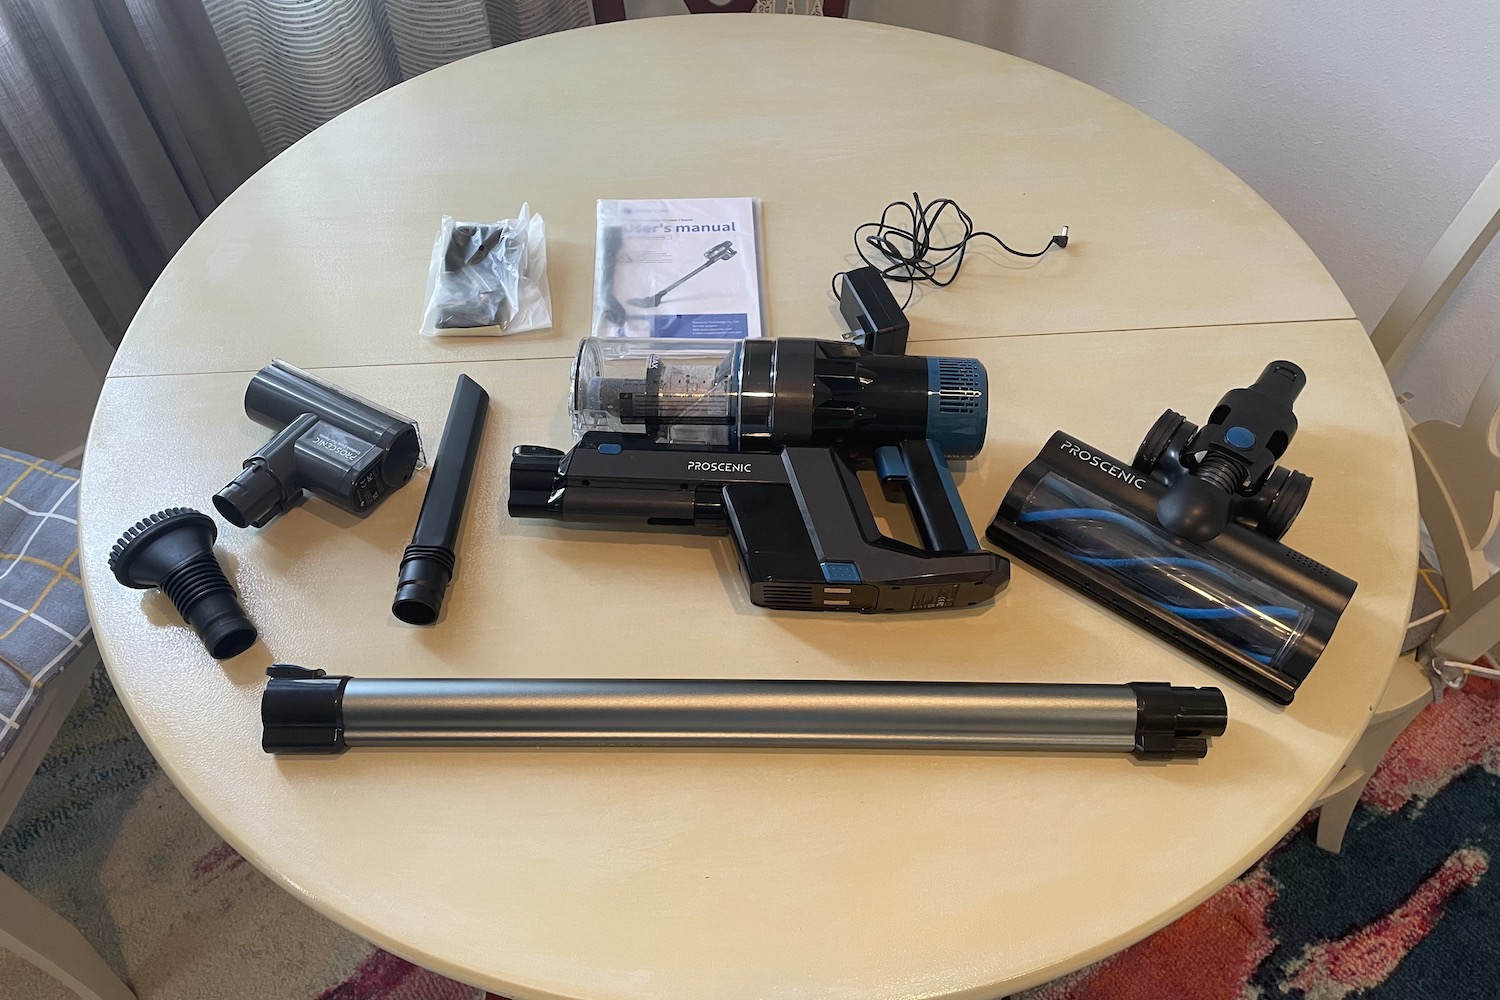 Unboxing the Proscenic P11 Mopping Cordless Vacuum and Setup